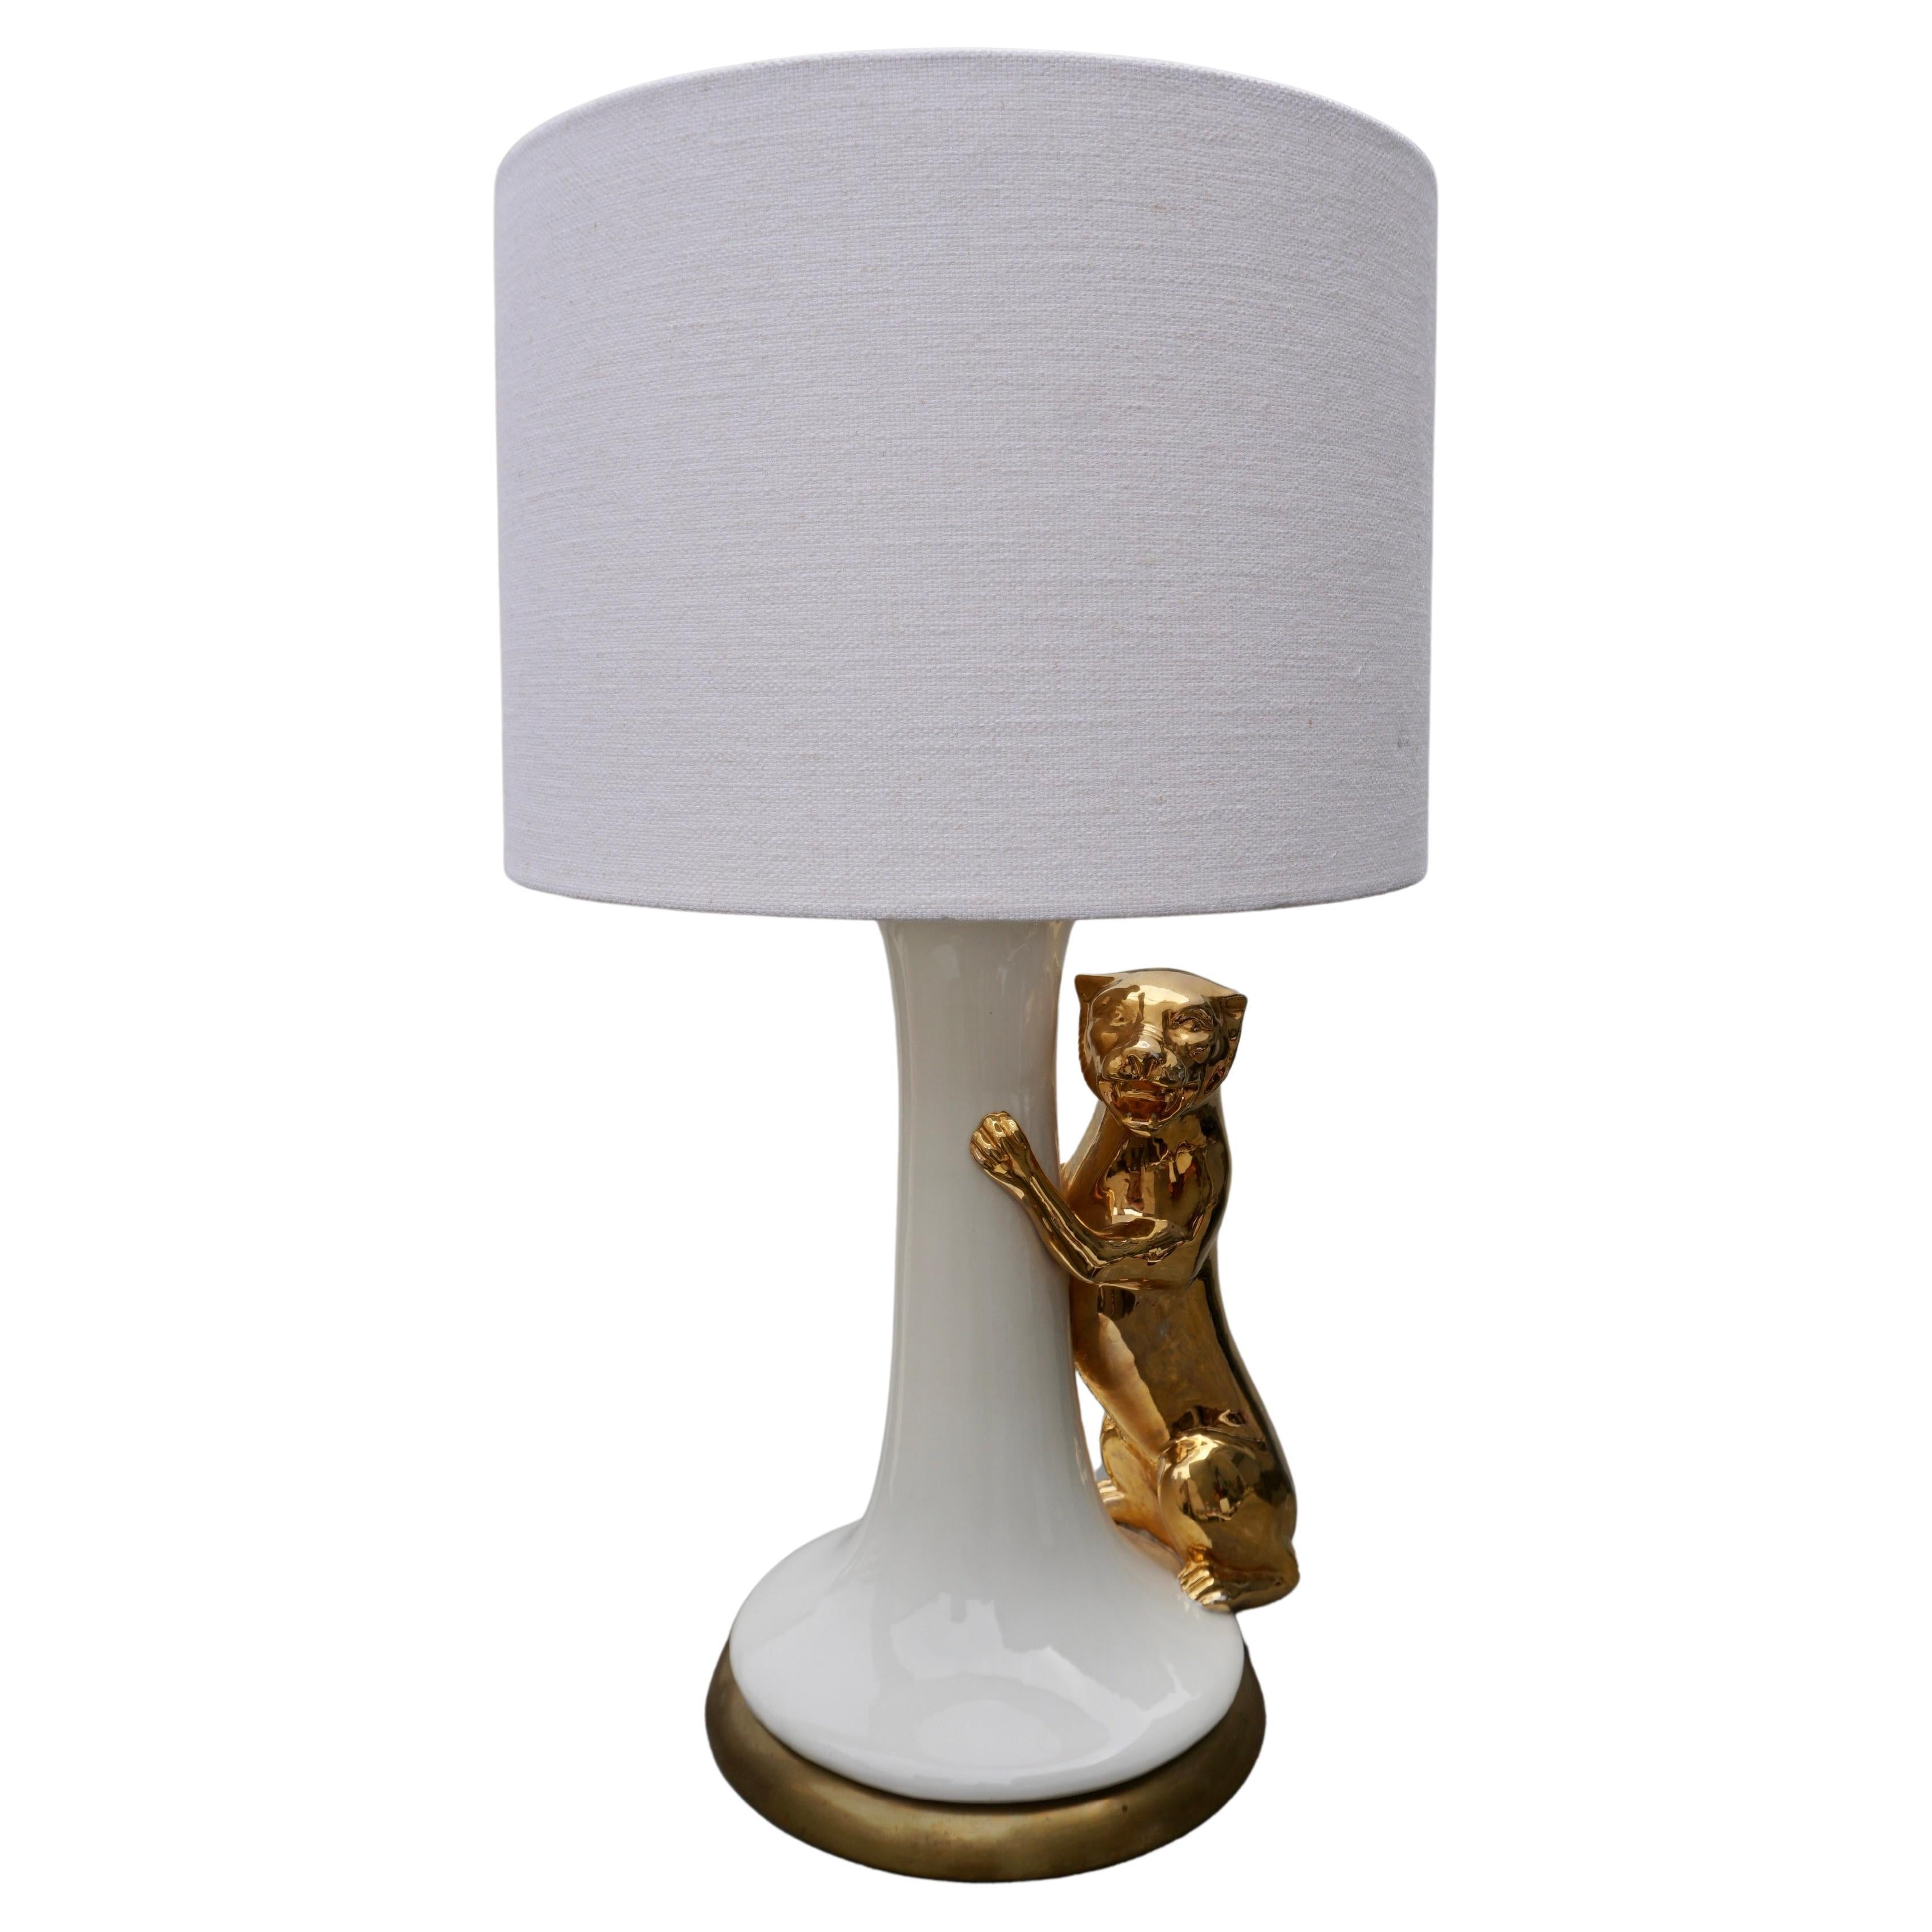 Italian Midcentury Table Lamp with Ceramic Gilt Panther, 1970s For Sale